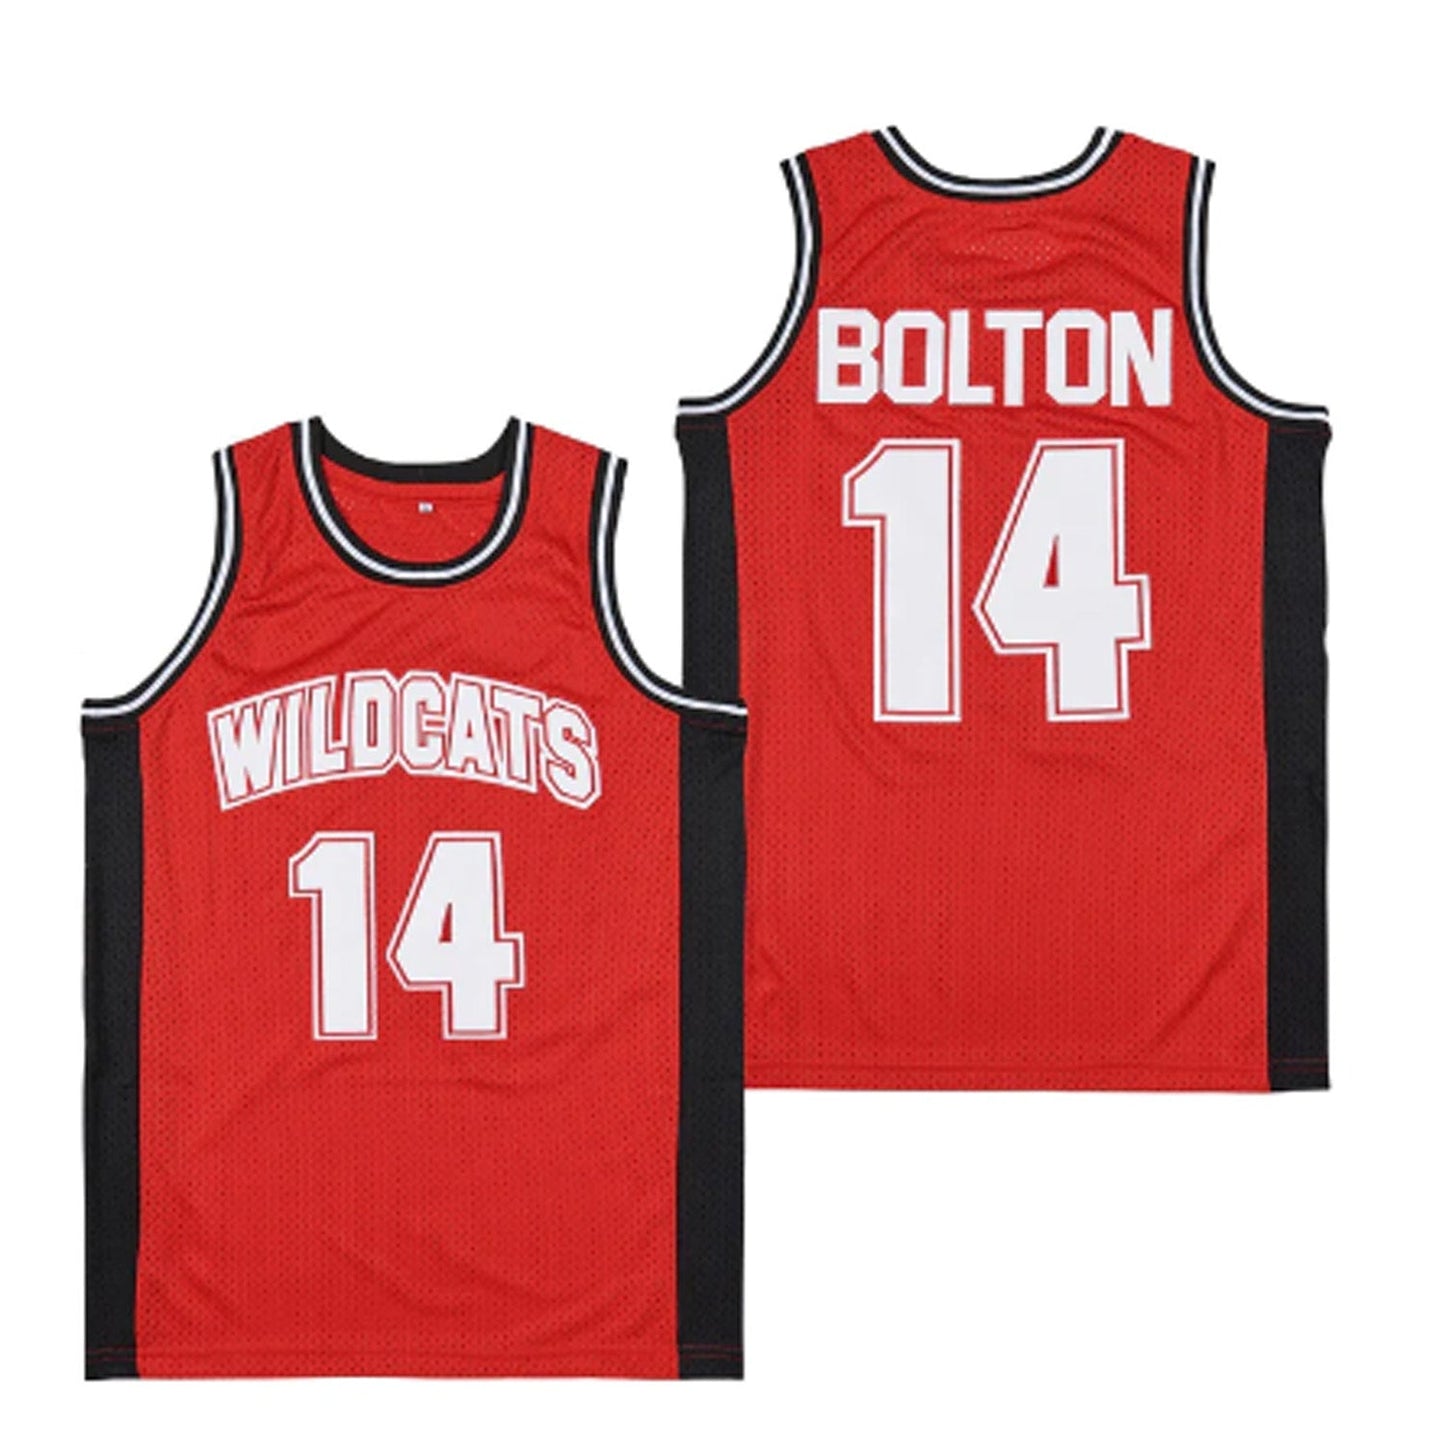 High School Musical 'Troy Bolton' Wildcats 14 Jersey